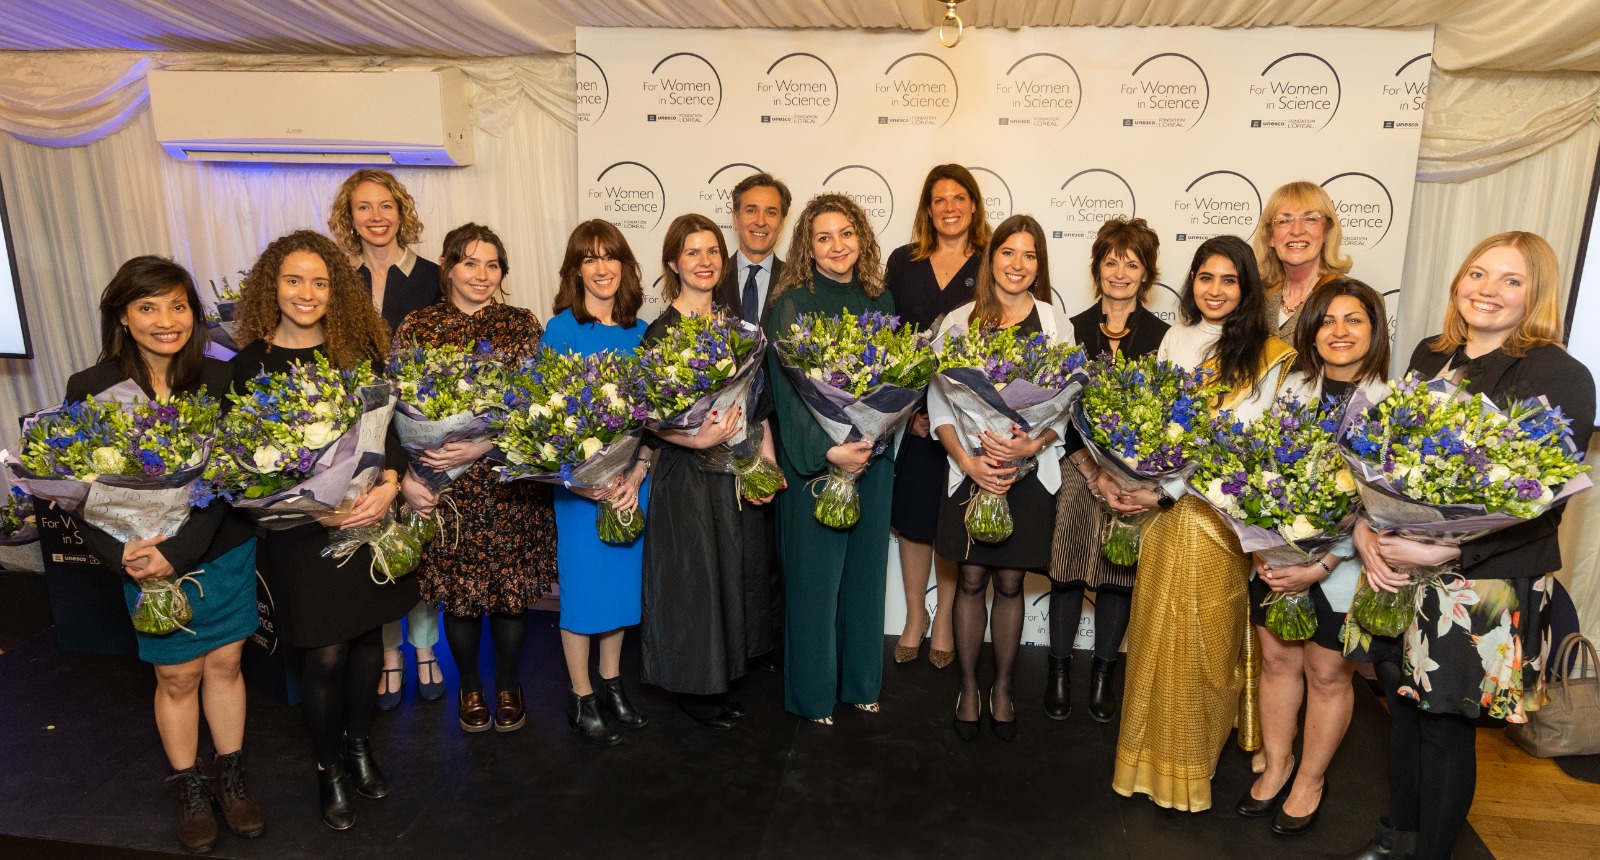 Shortlisted candidates, holding bunches of flowers, stand in a semi-circle with other guests.